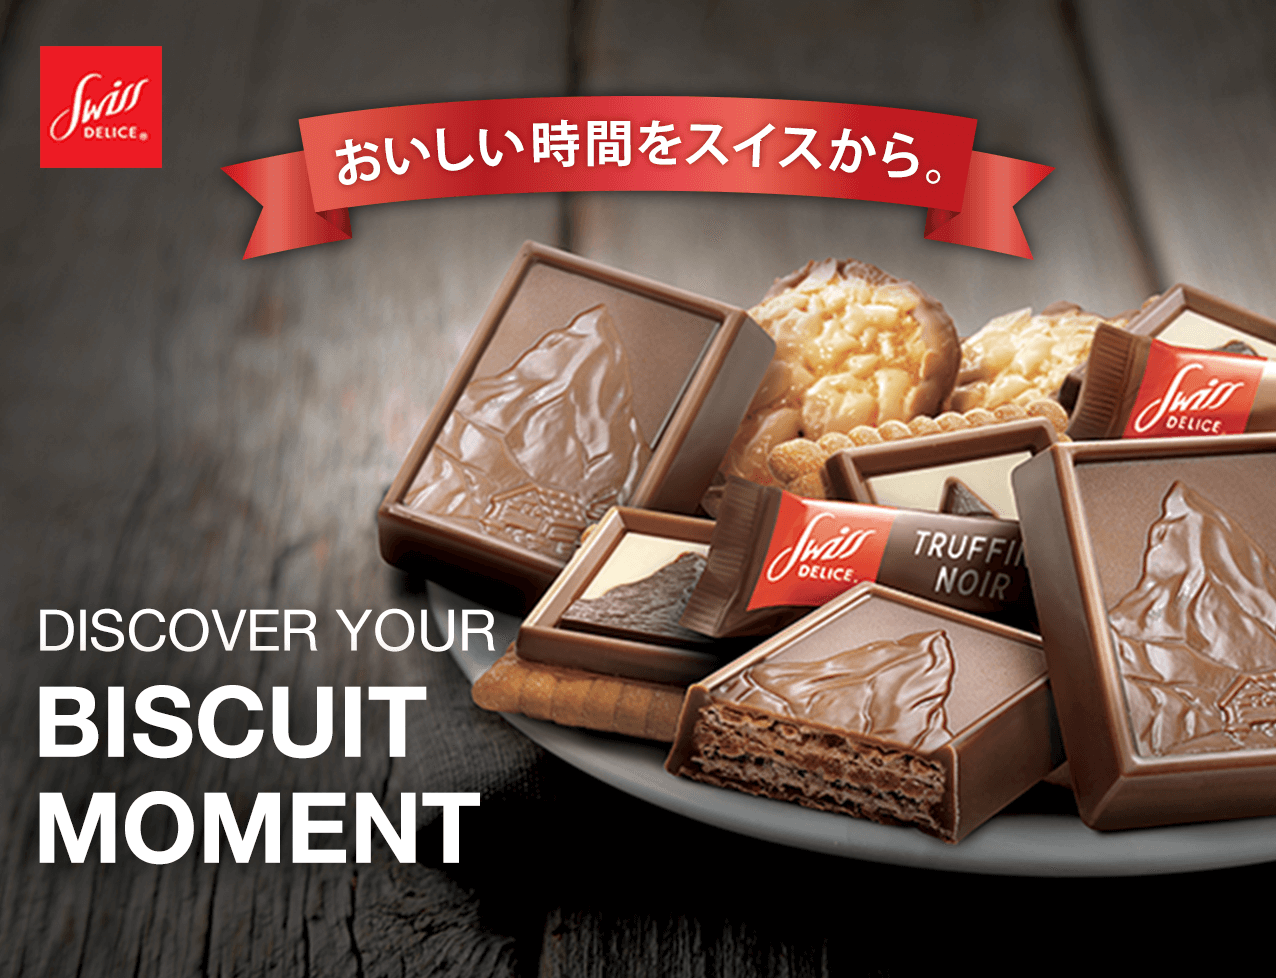 ԂXCX@DISCOVER YOUR BISCUIT MOMENT